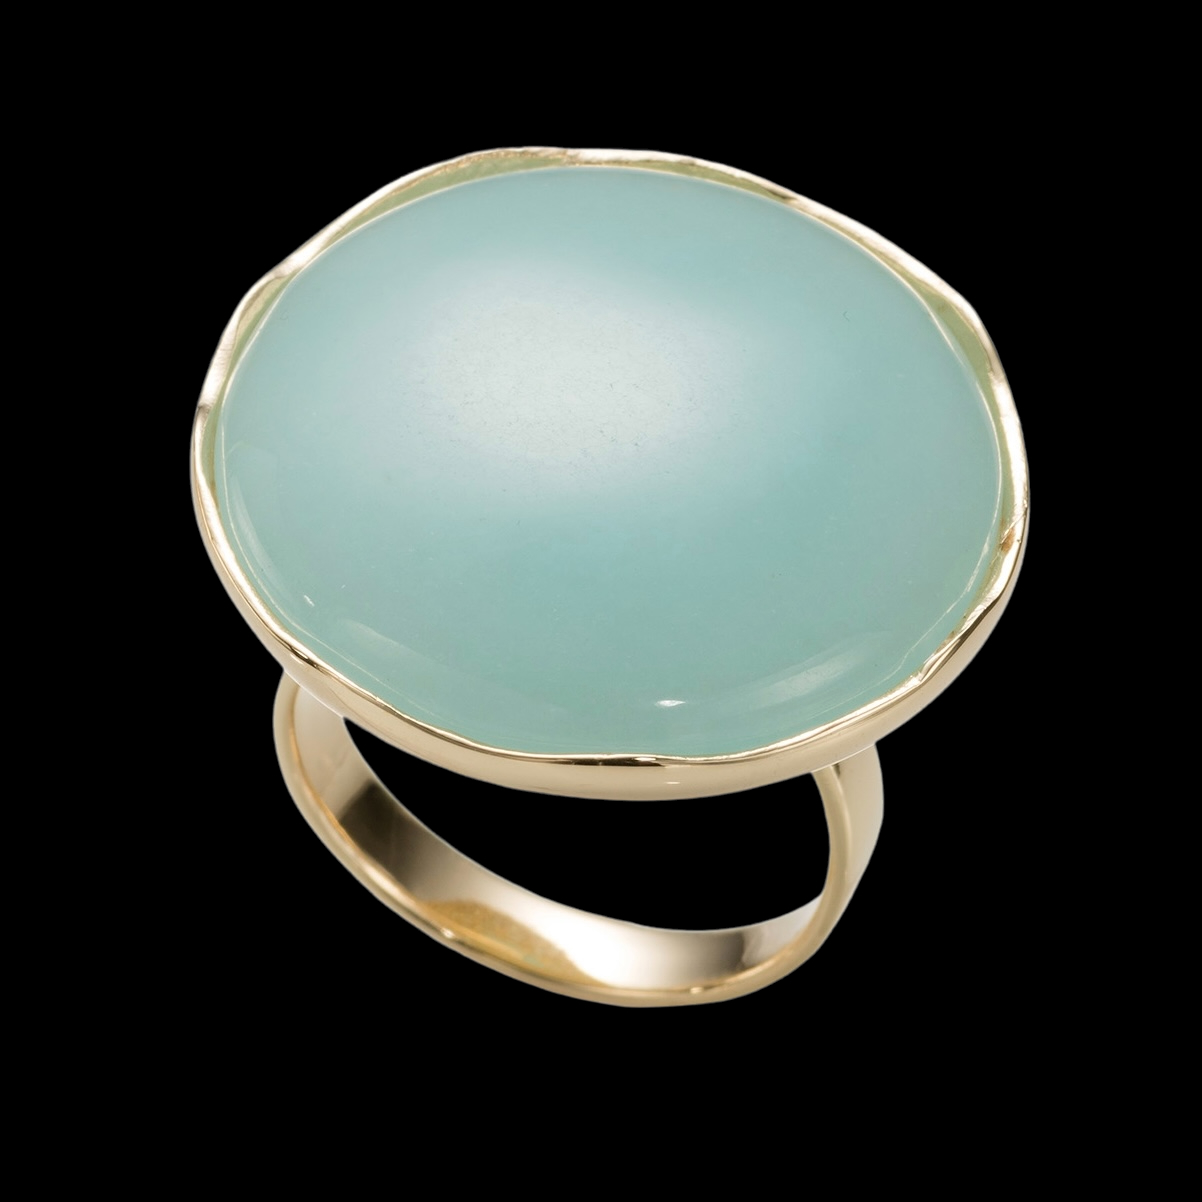 Gold plated ring with a turquoise quartz stone